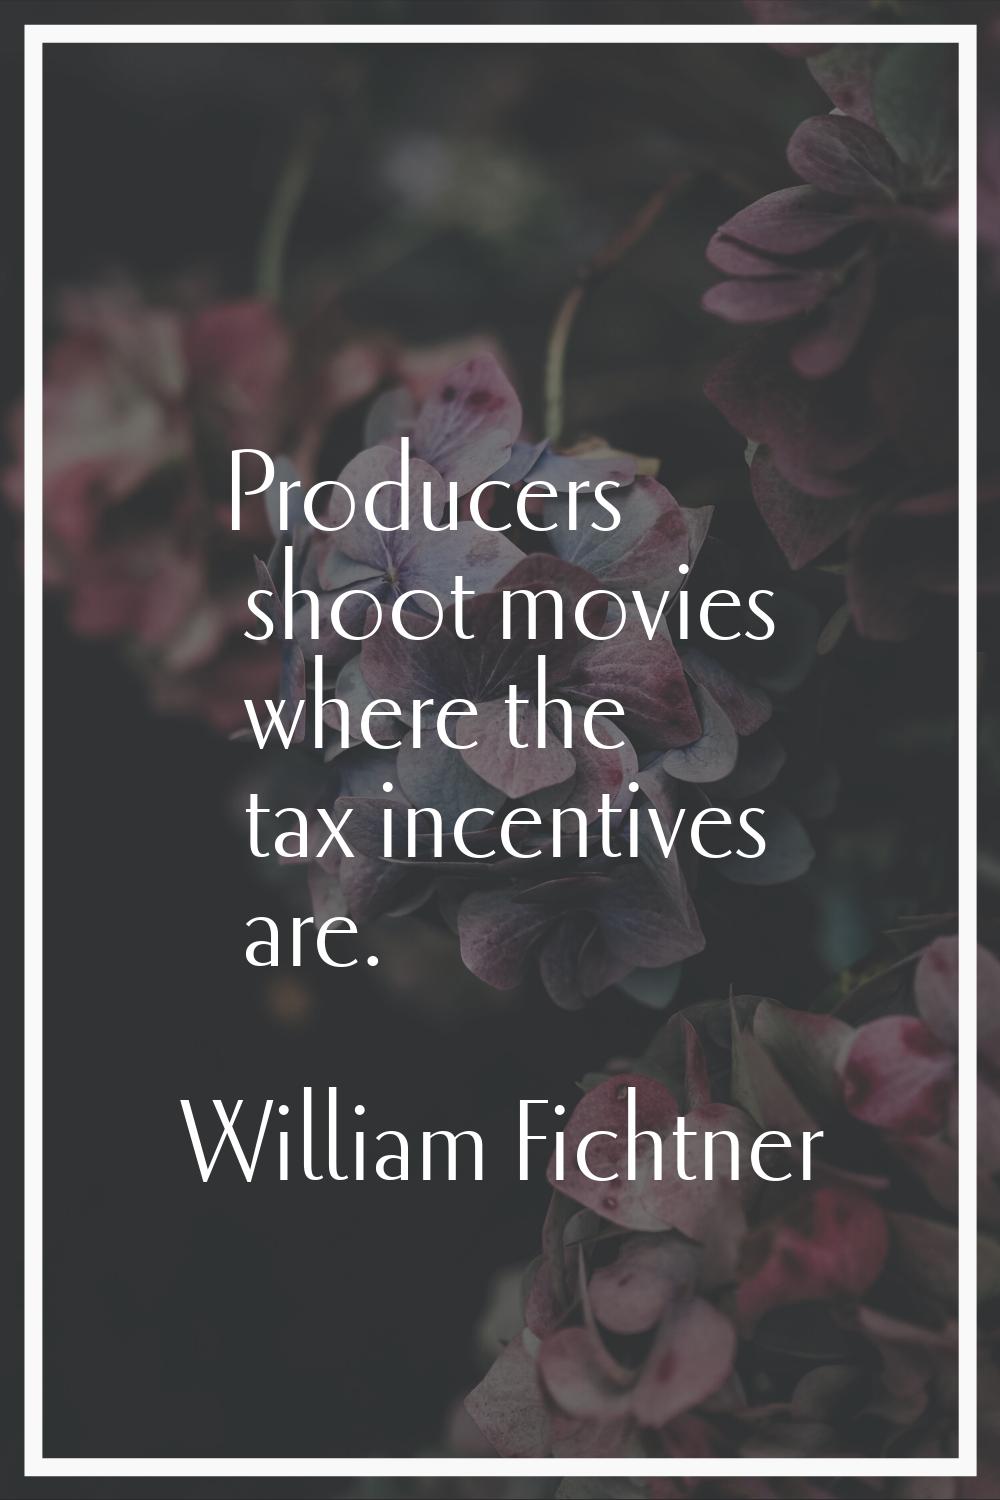 Producers shoot movies where the tax incentives are.